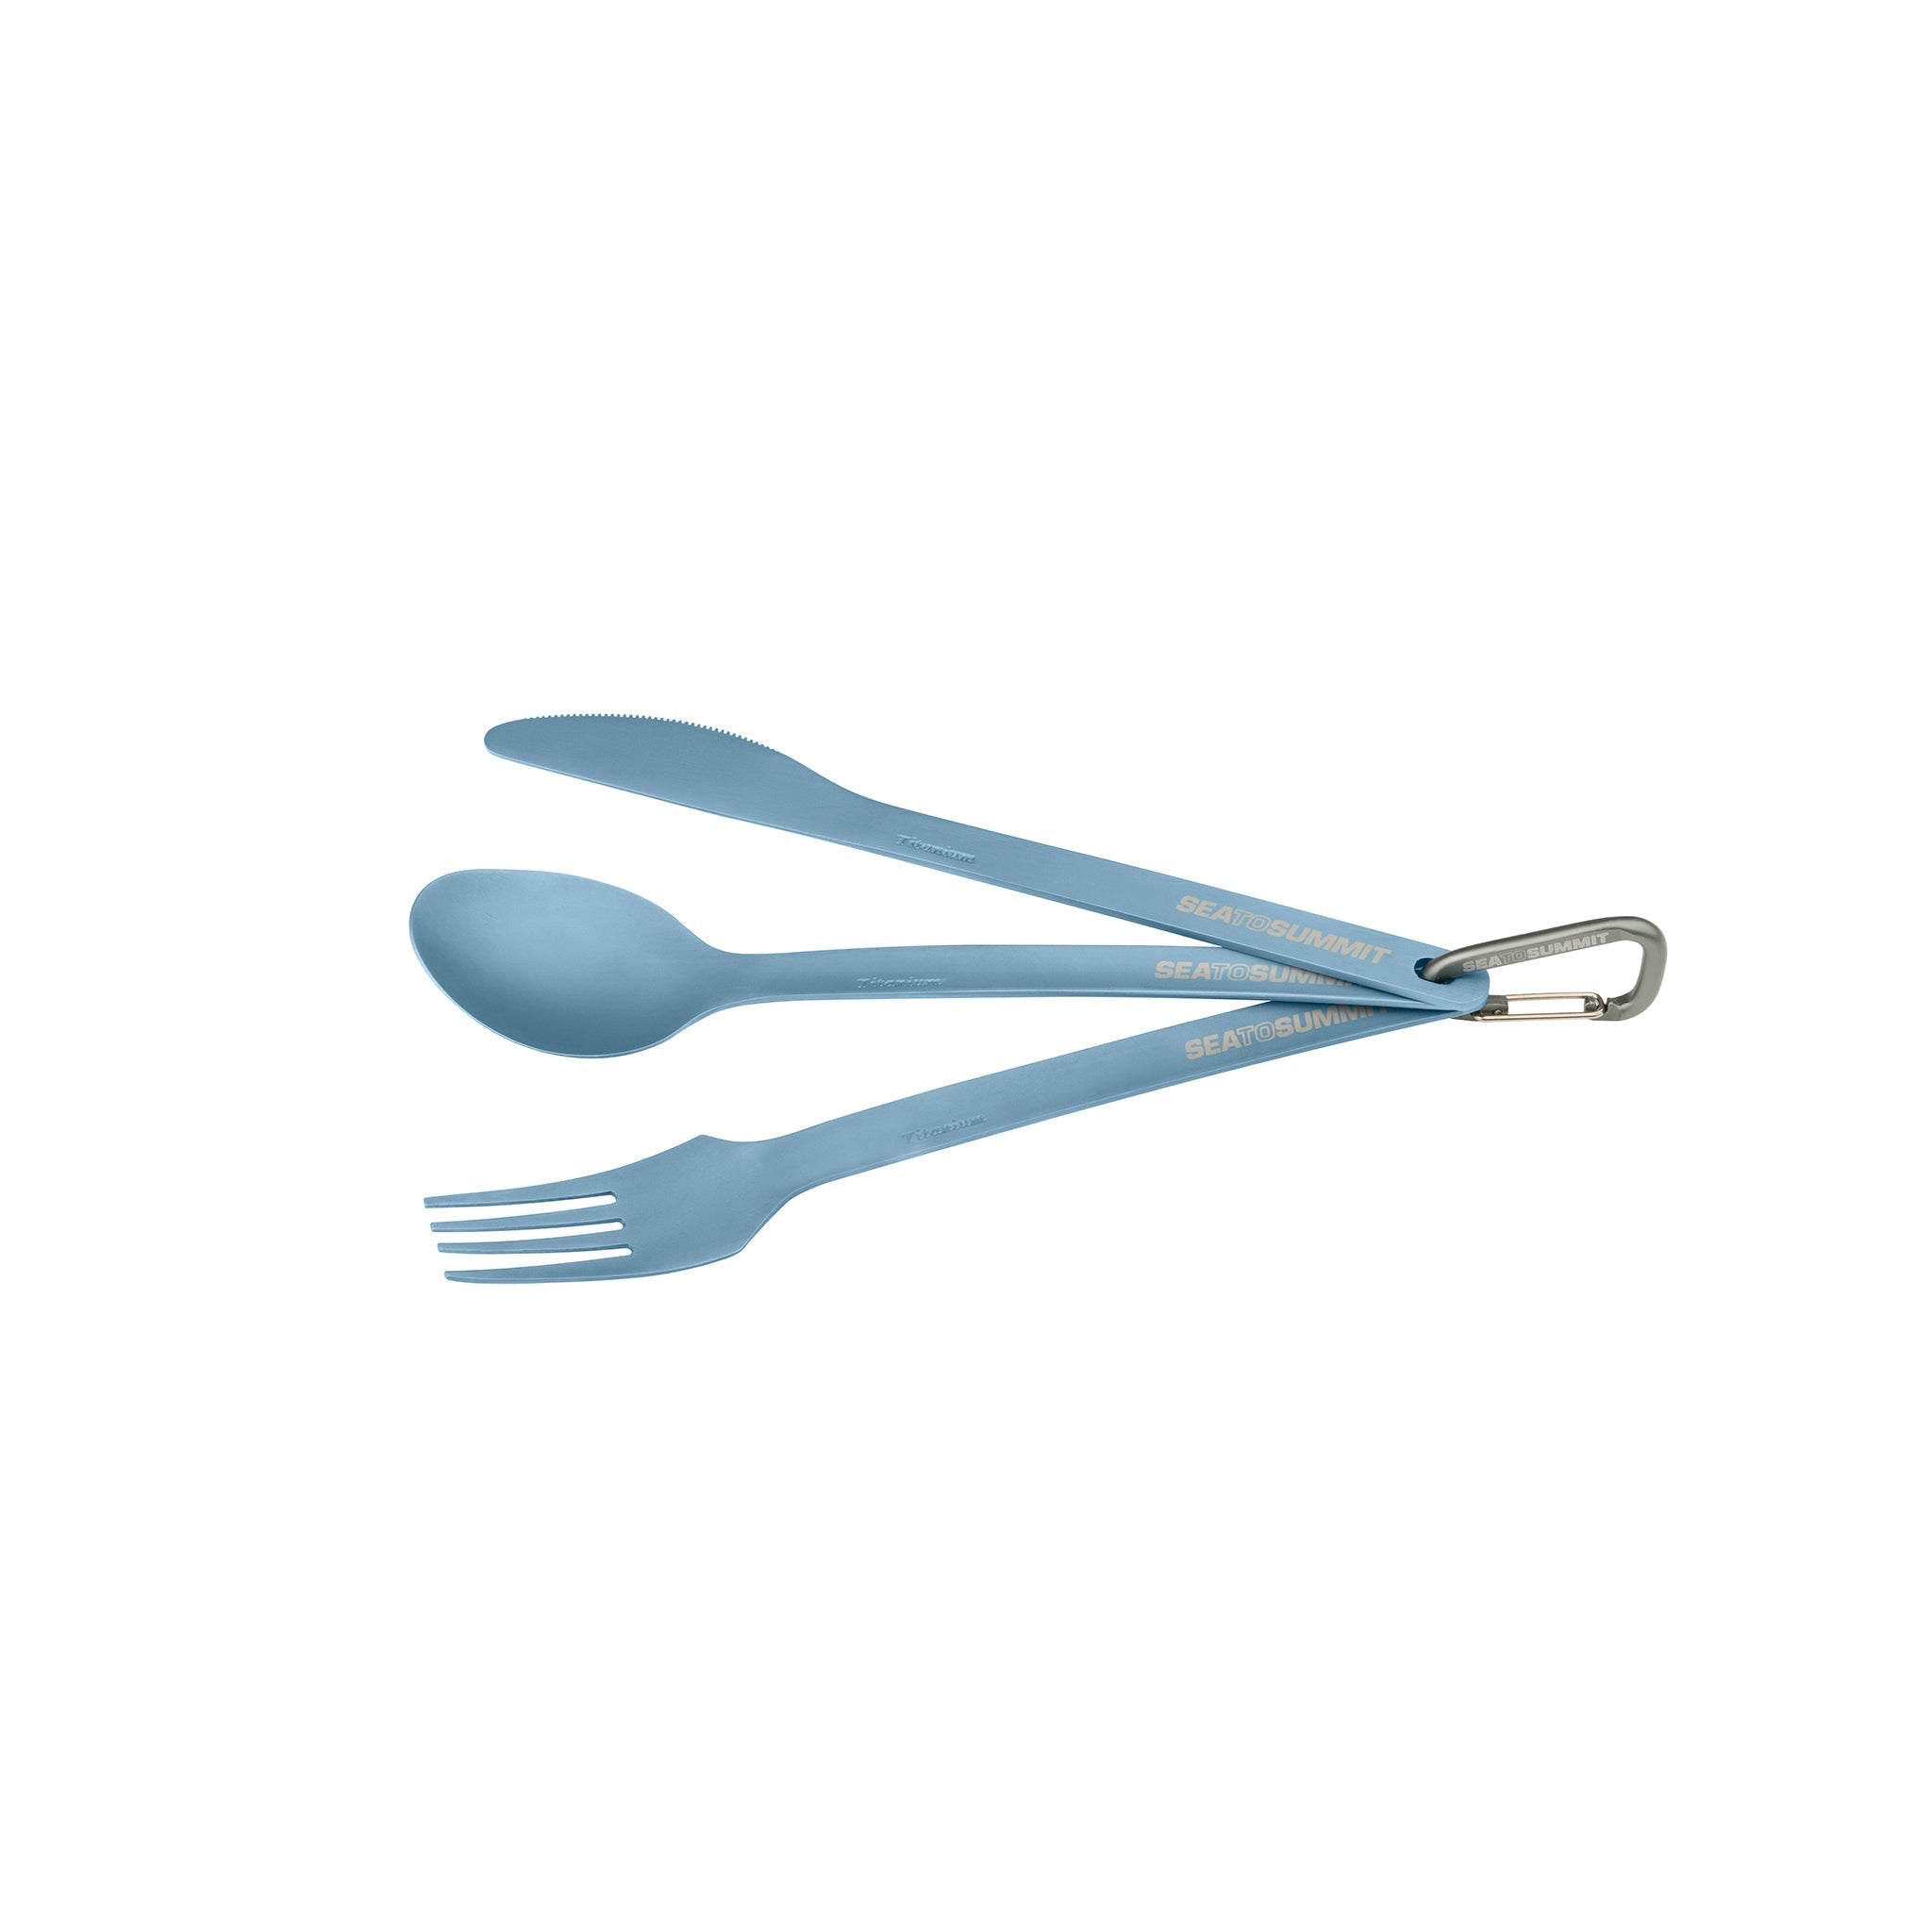 A Healthy Alternative: Solid Titanium Cutlery Set by Woerden by